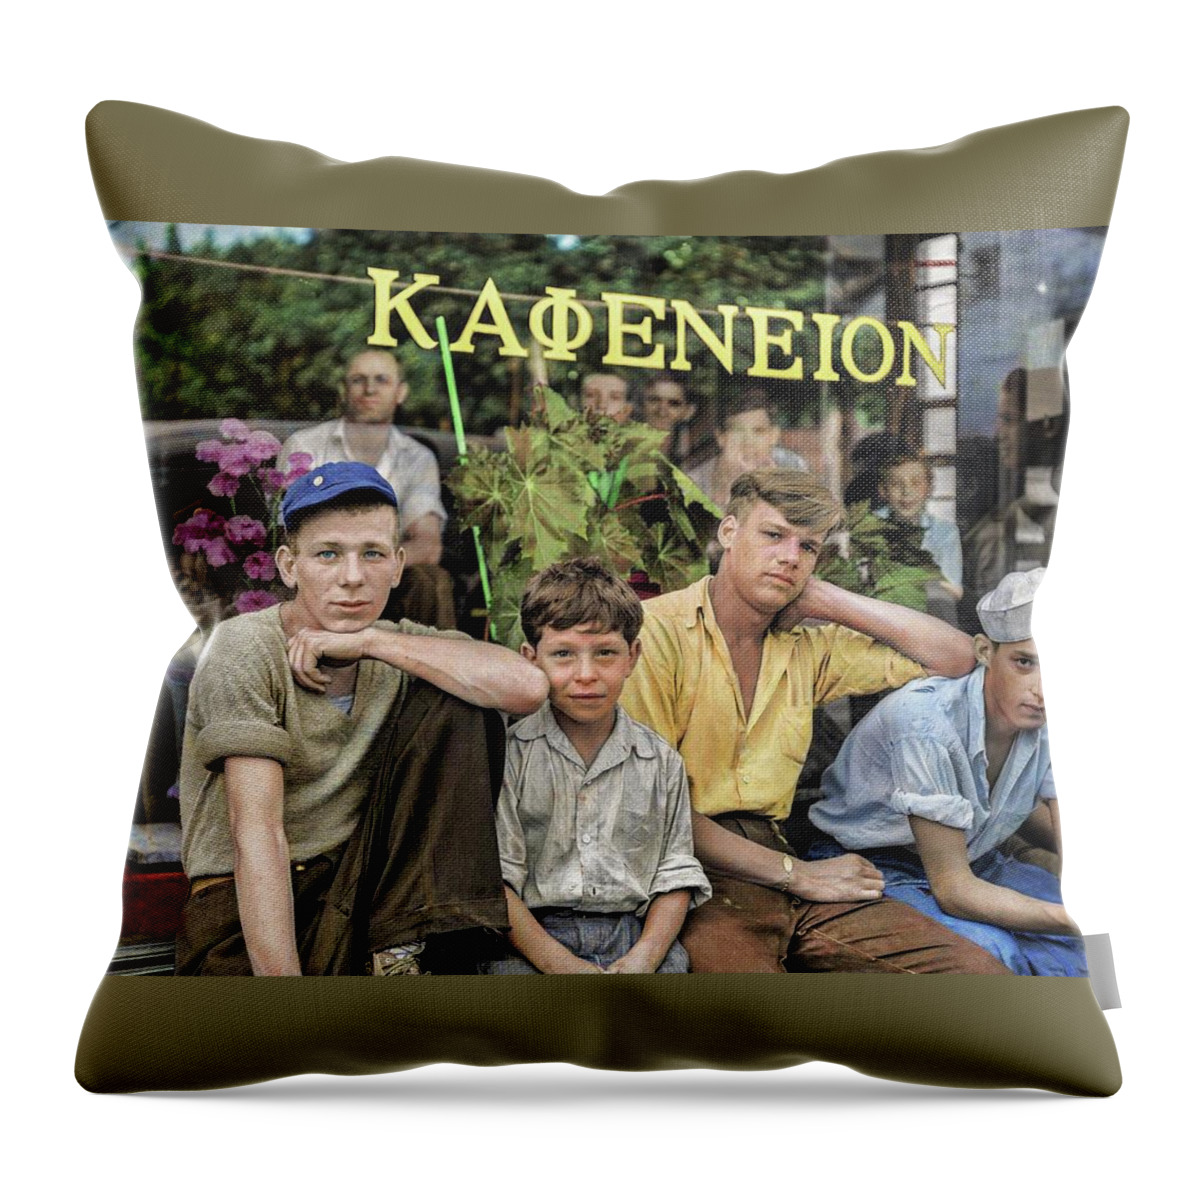 Oil On Canvas Throw Pillow featuring the digital art Medium format by Celestial Images